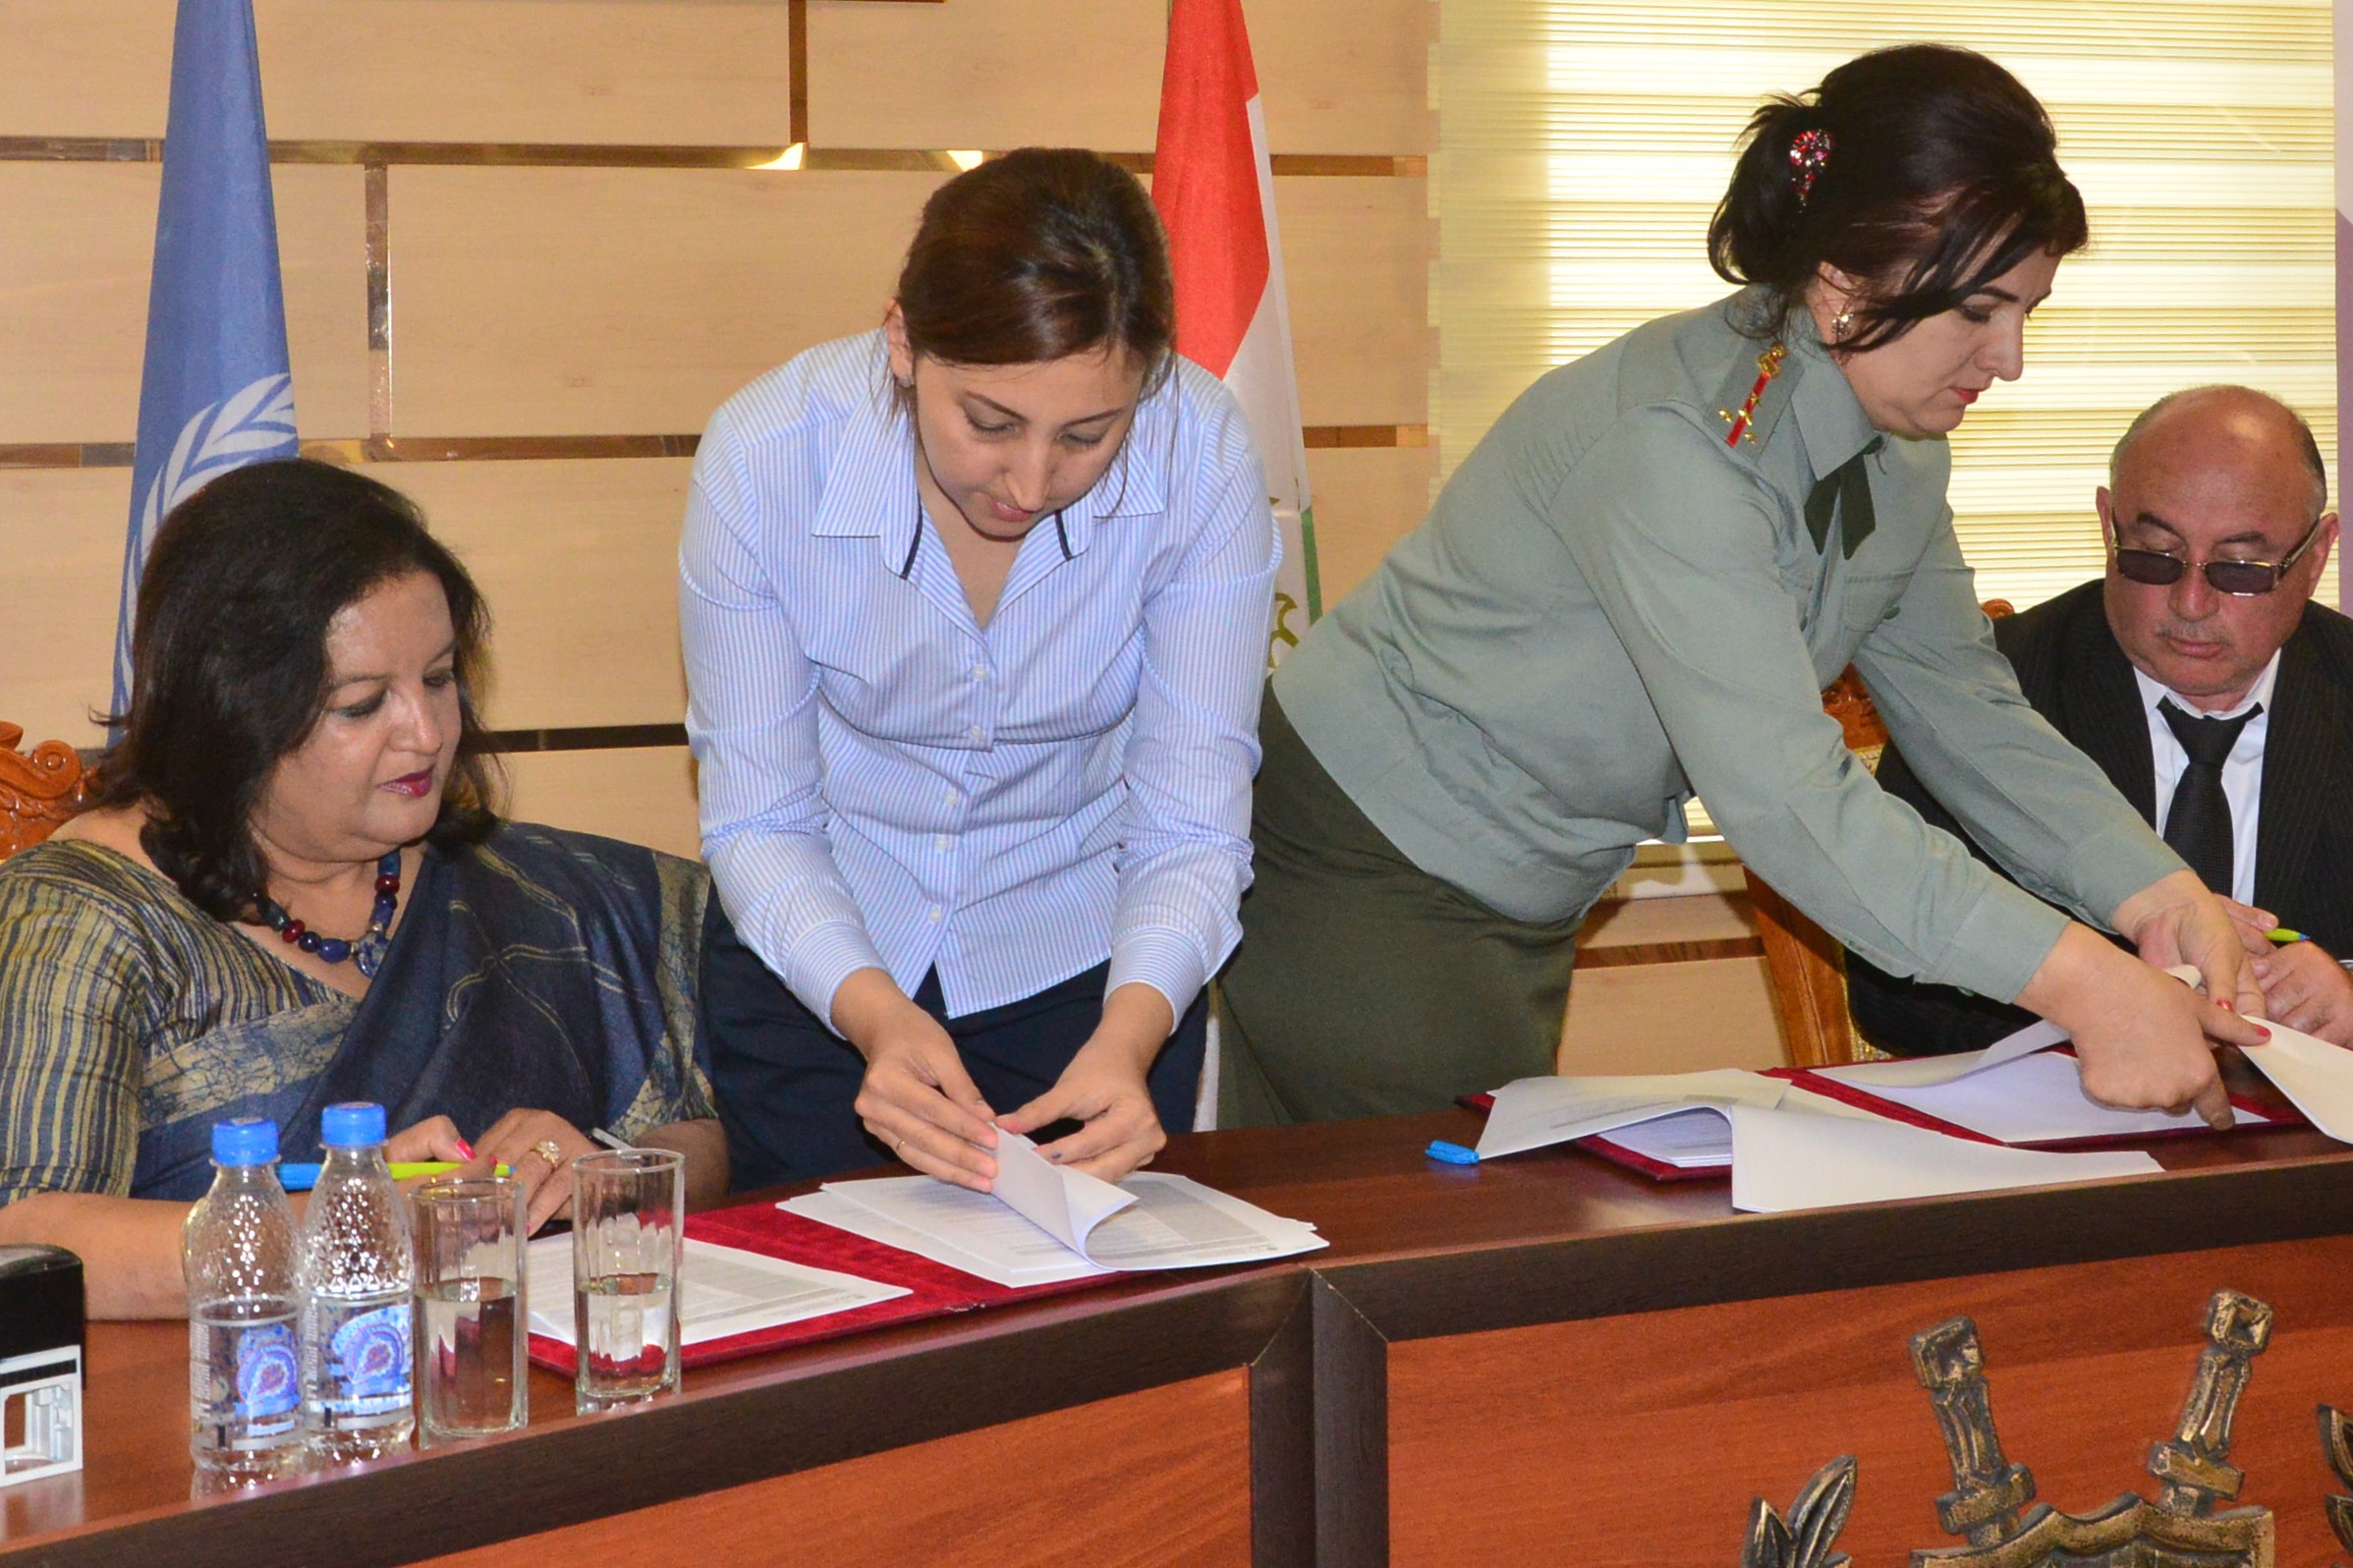 With a focus on reducing prisoner re-offending, new vocational and work-based rehabilitation projects launched in Tajikistan